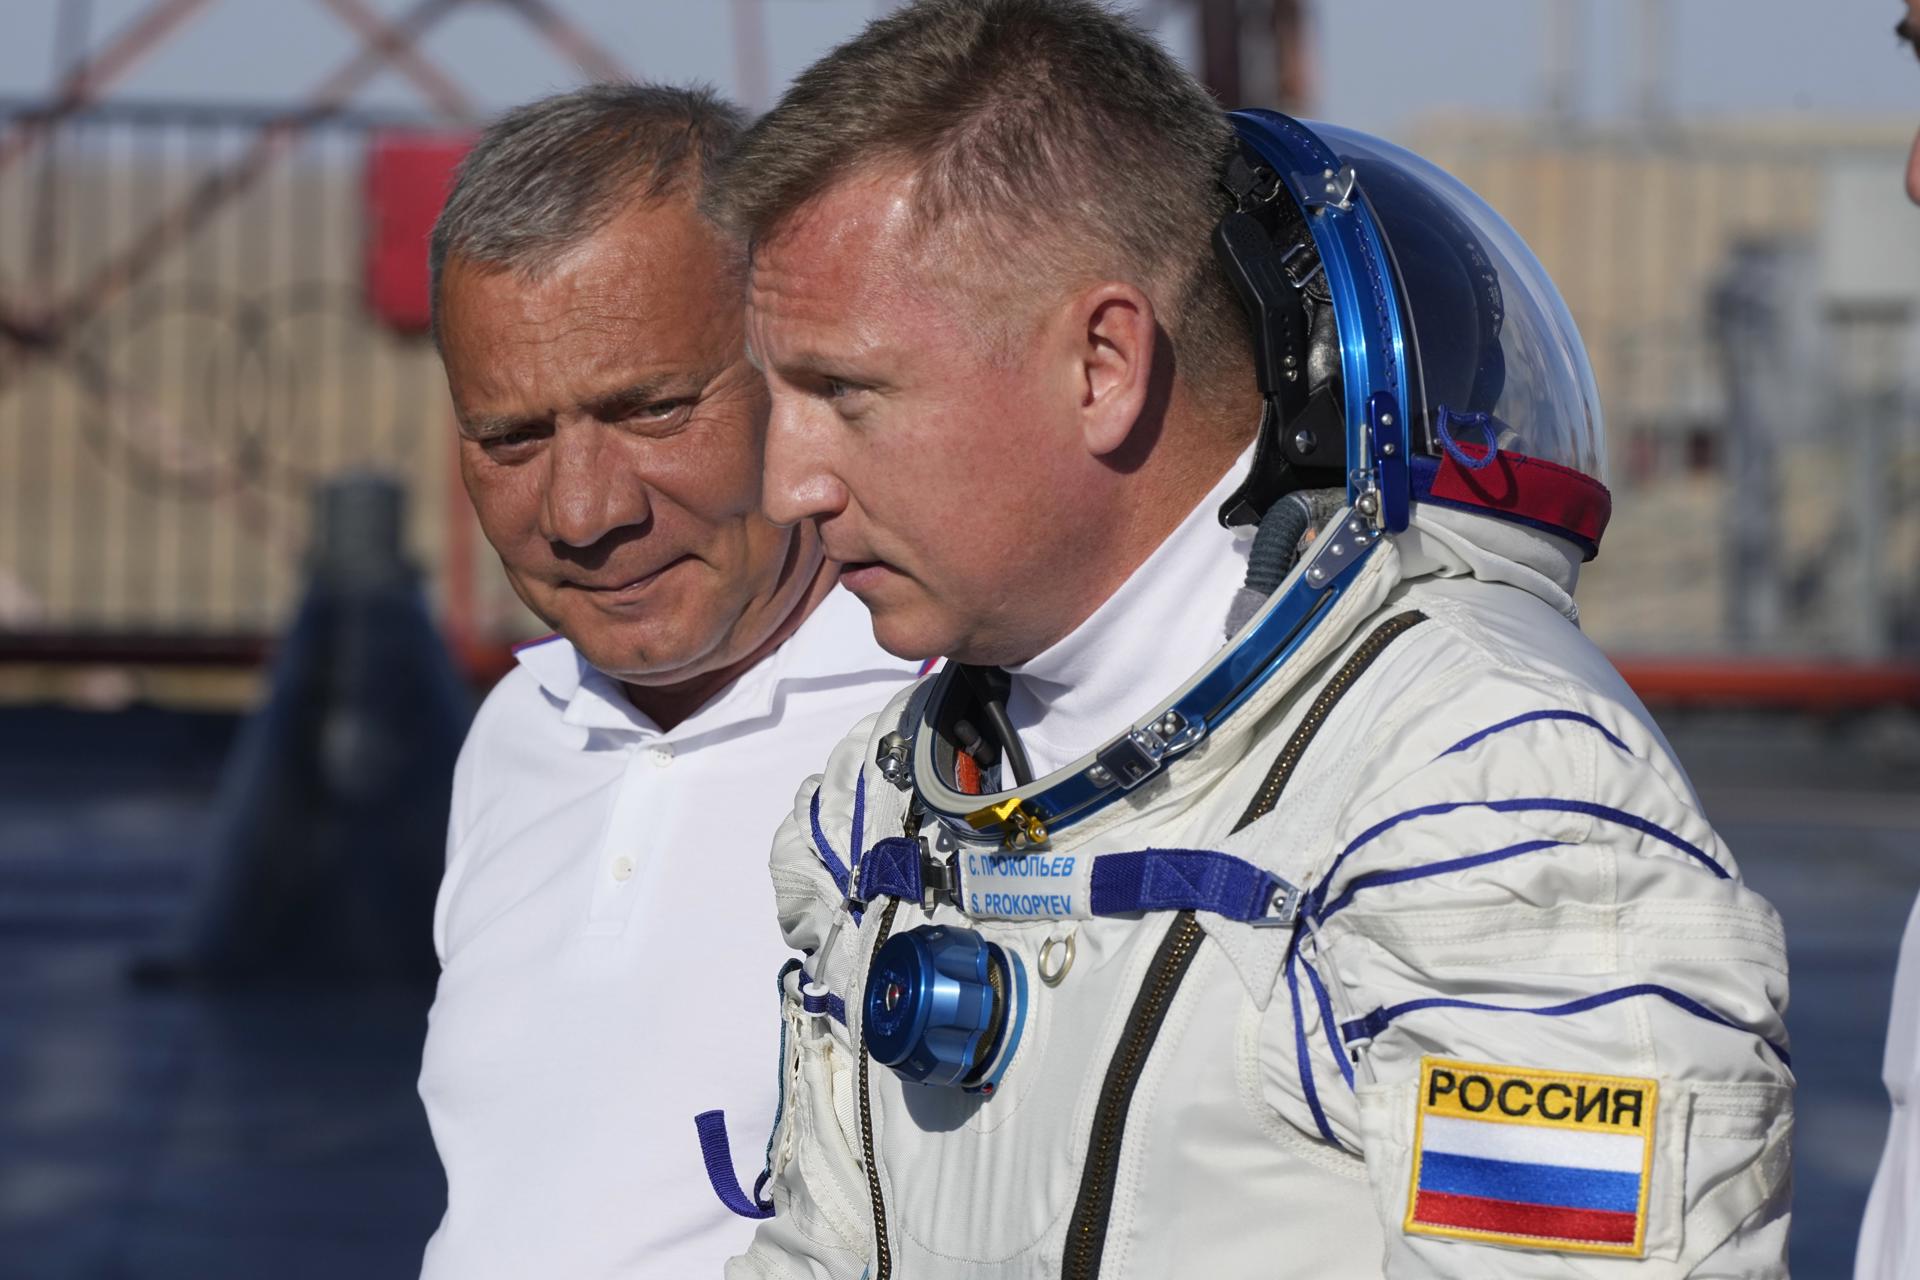 Roscosmos cosmonaut Sergey Prokopyev (R), crew member of the mission to the International Space Station (ISS) walks to the rocket accompanied by head of Roscosmos space agency Yuri Borisov prior the launch of Soyuz-2.1 rocket at the Russian leased Baikonur cosmodrome, Kazakhstan, 21 September 2022. EFE-EPA/DMITRI LOVETSKY/POOL/FILE